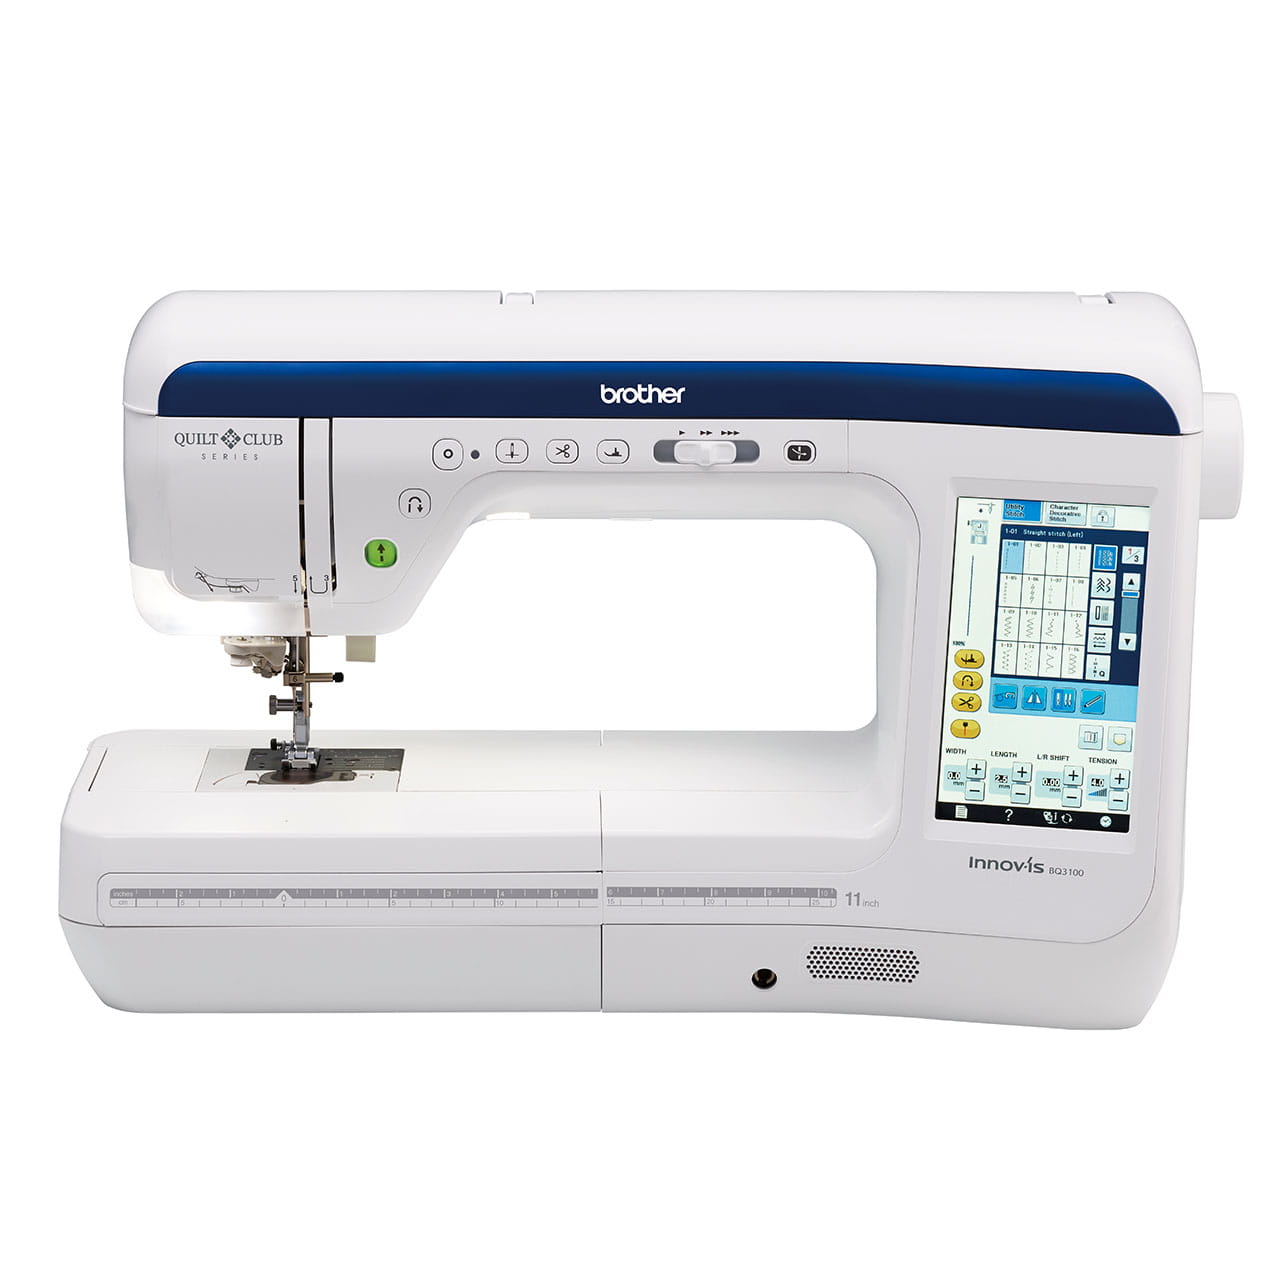 Brother BQ3100 Sewing, Embroidery & Quilting Machine Front View